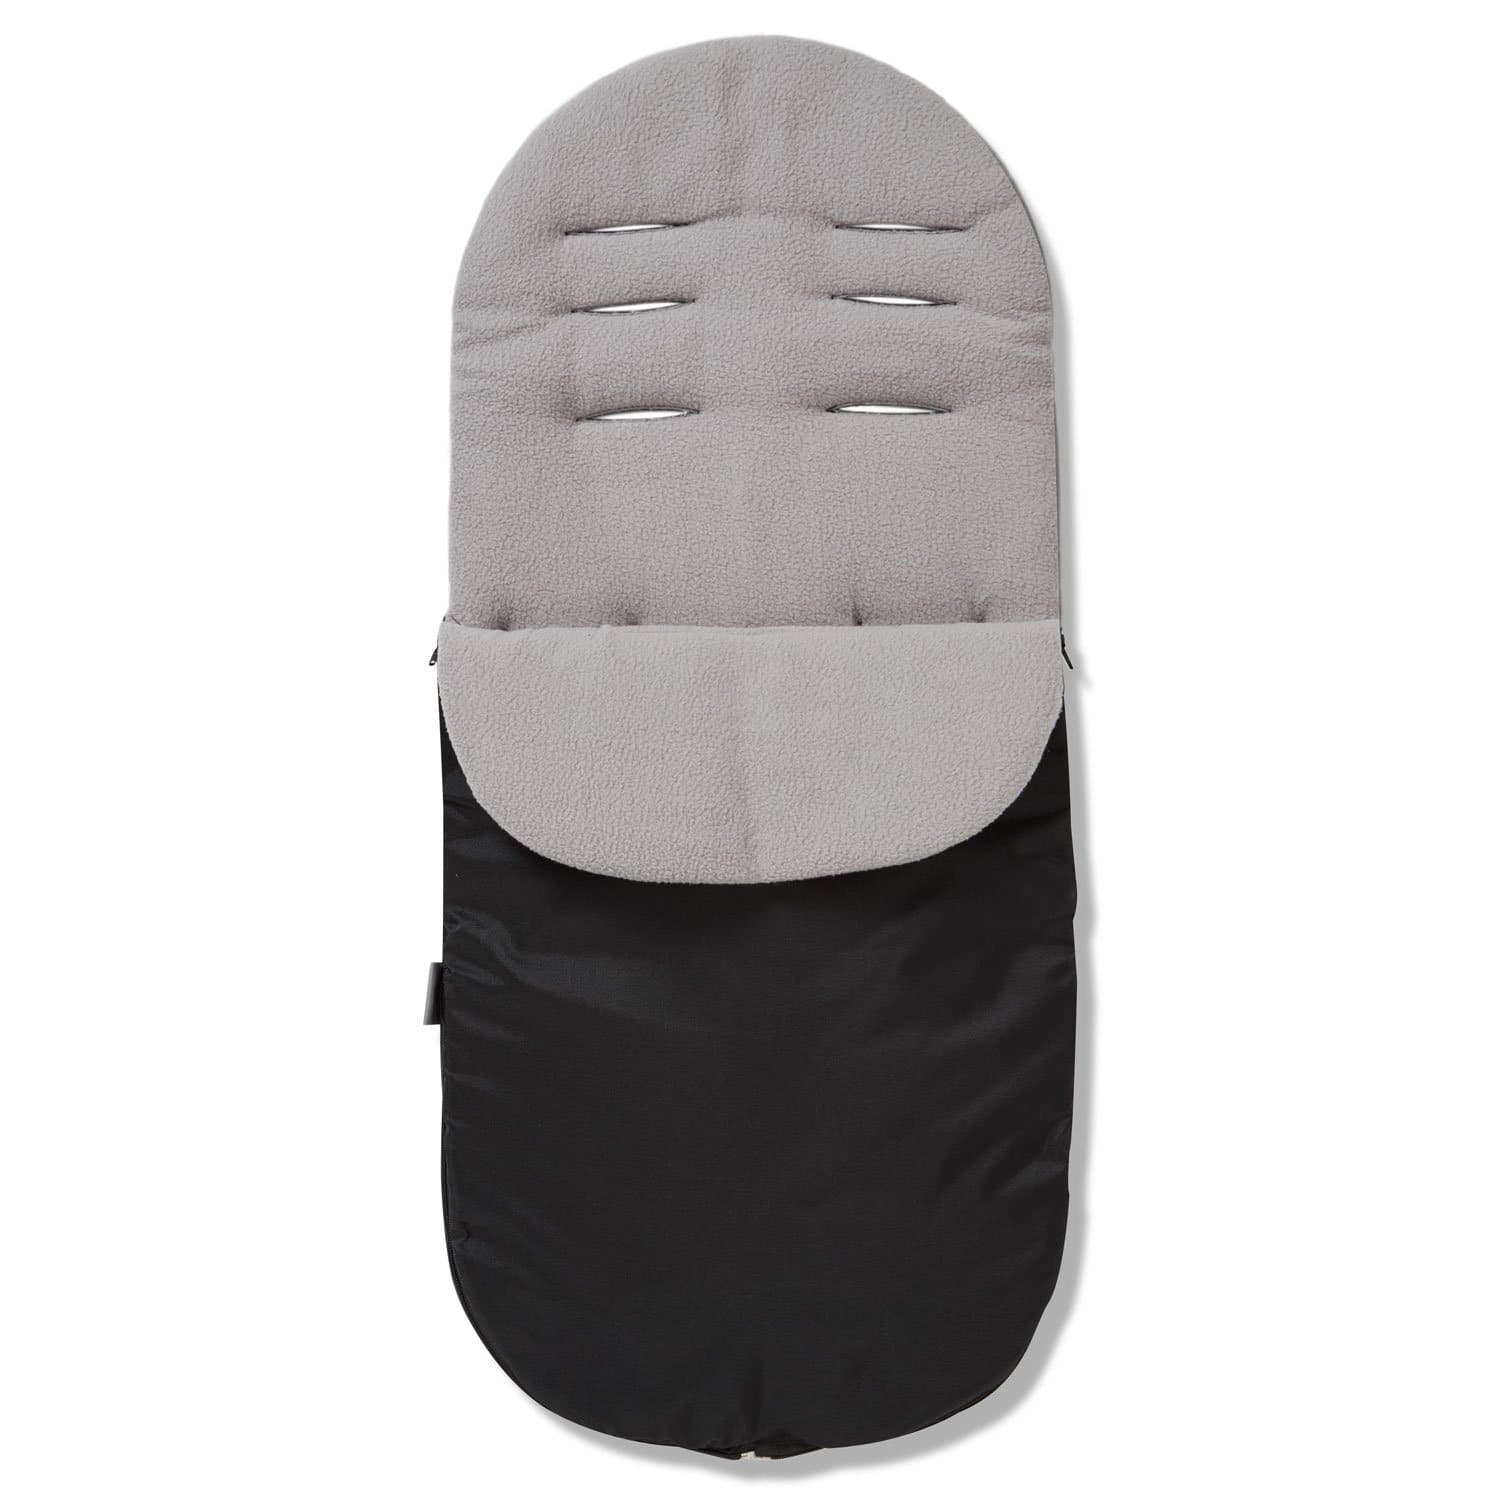 Footmuff / Cosy Toes Compatible with Silver Cross - Grey / Fits All Models | For Your Little One